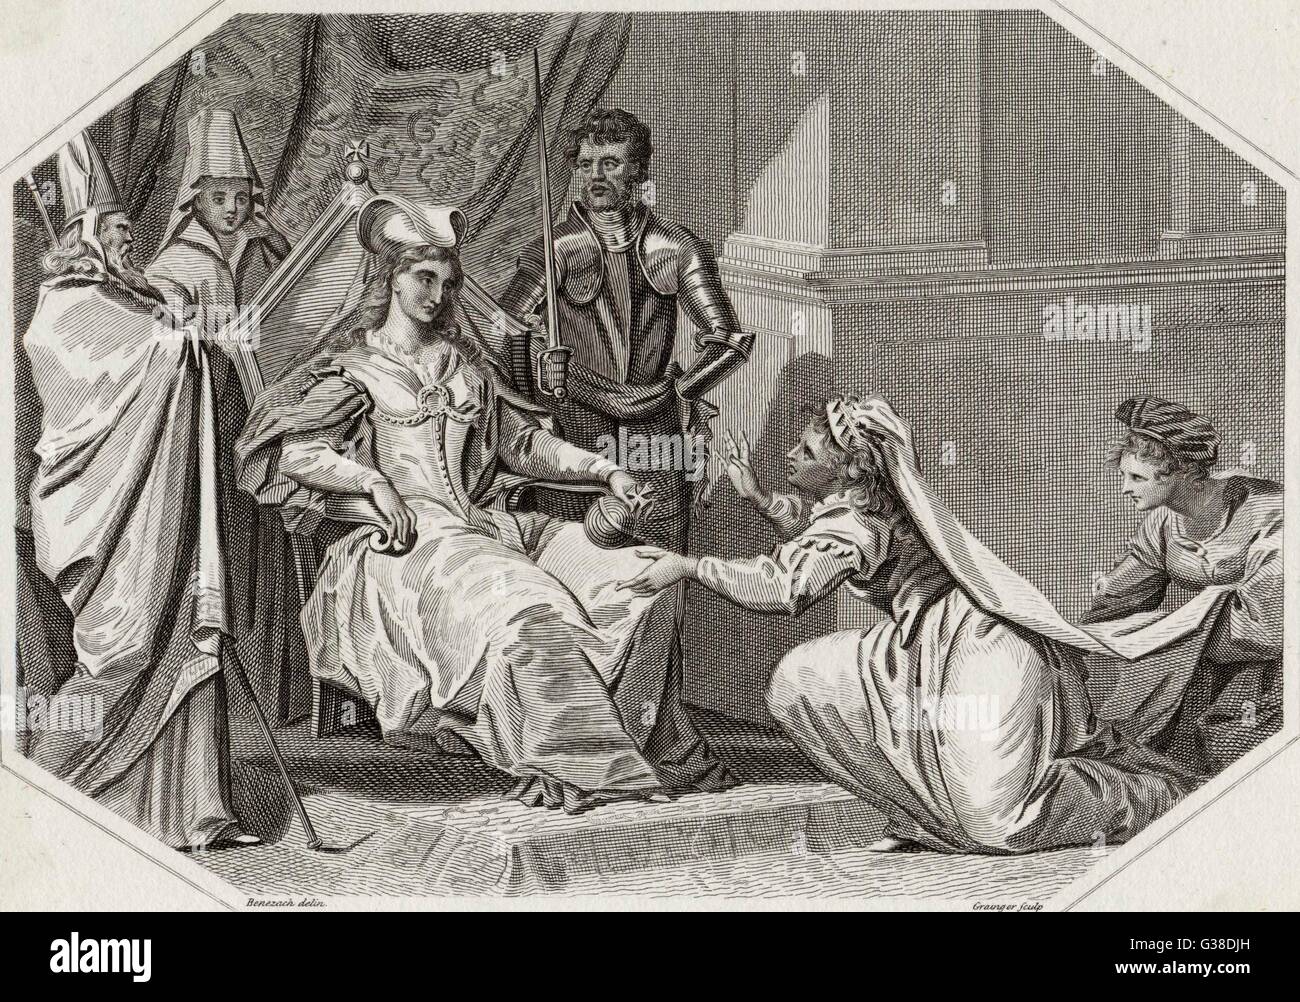 King Stephen's queen, Matilda,  pleads in vain for his release  to Empress Matilda of Germany,  daughter of Henry I, who has  invaded England      Date: 1141 Stock Photo